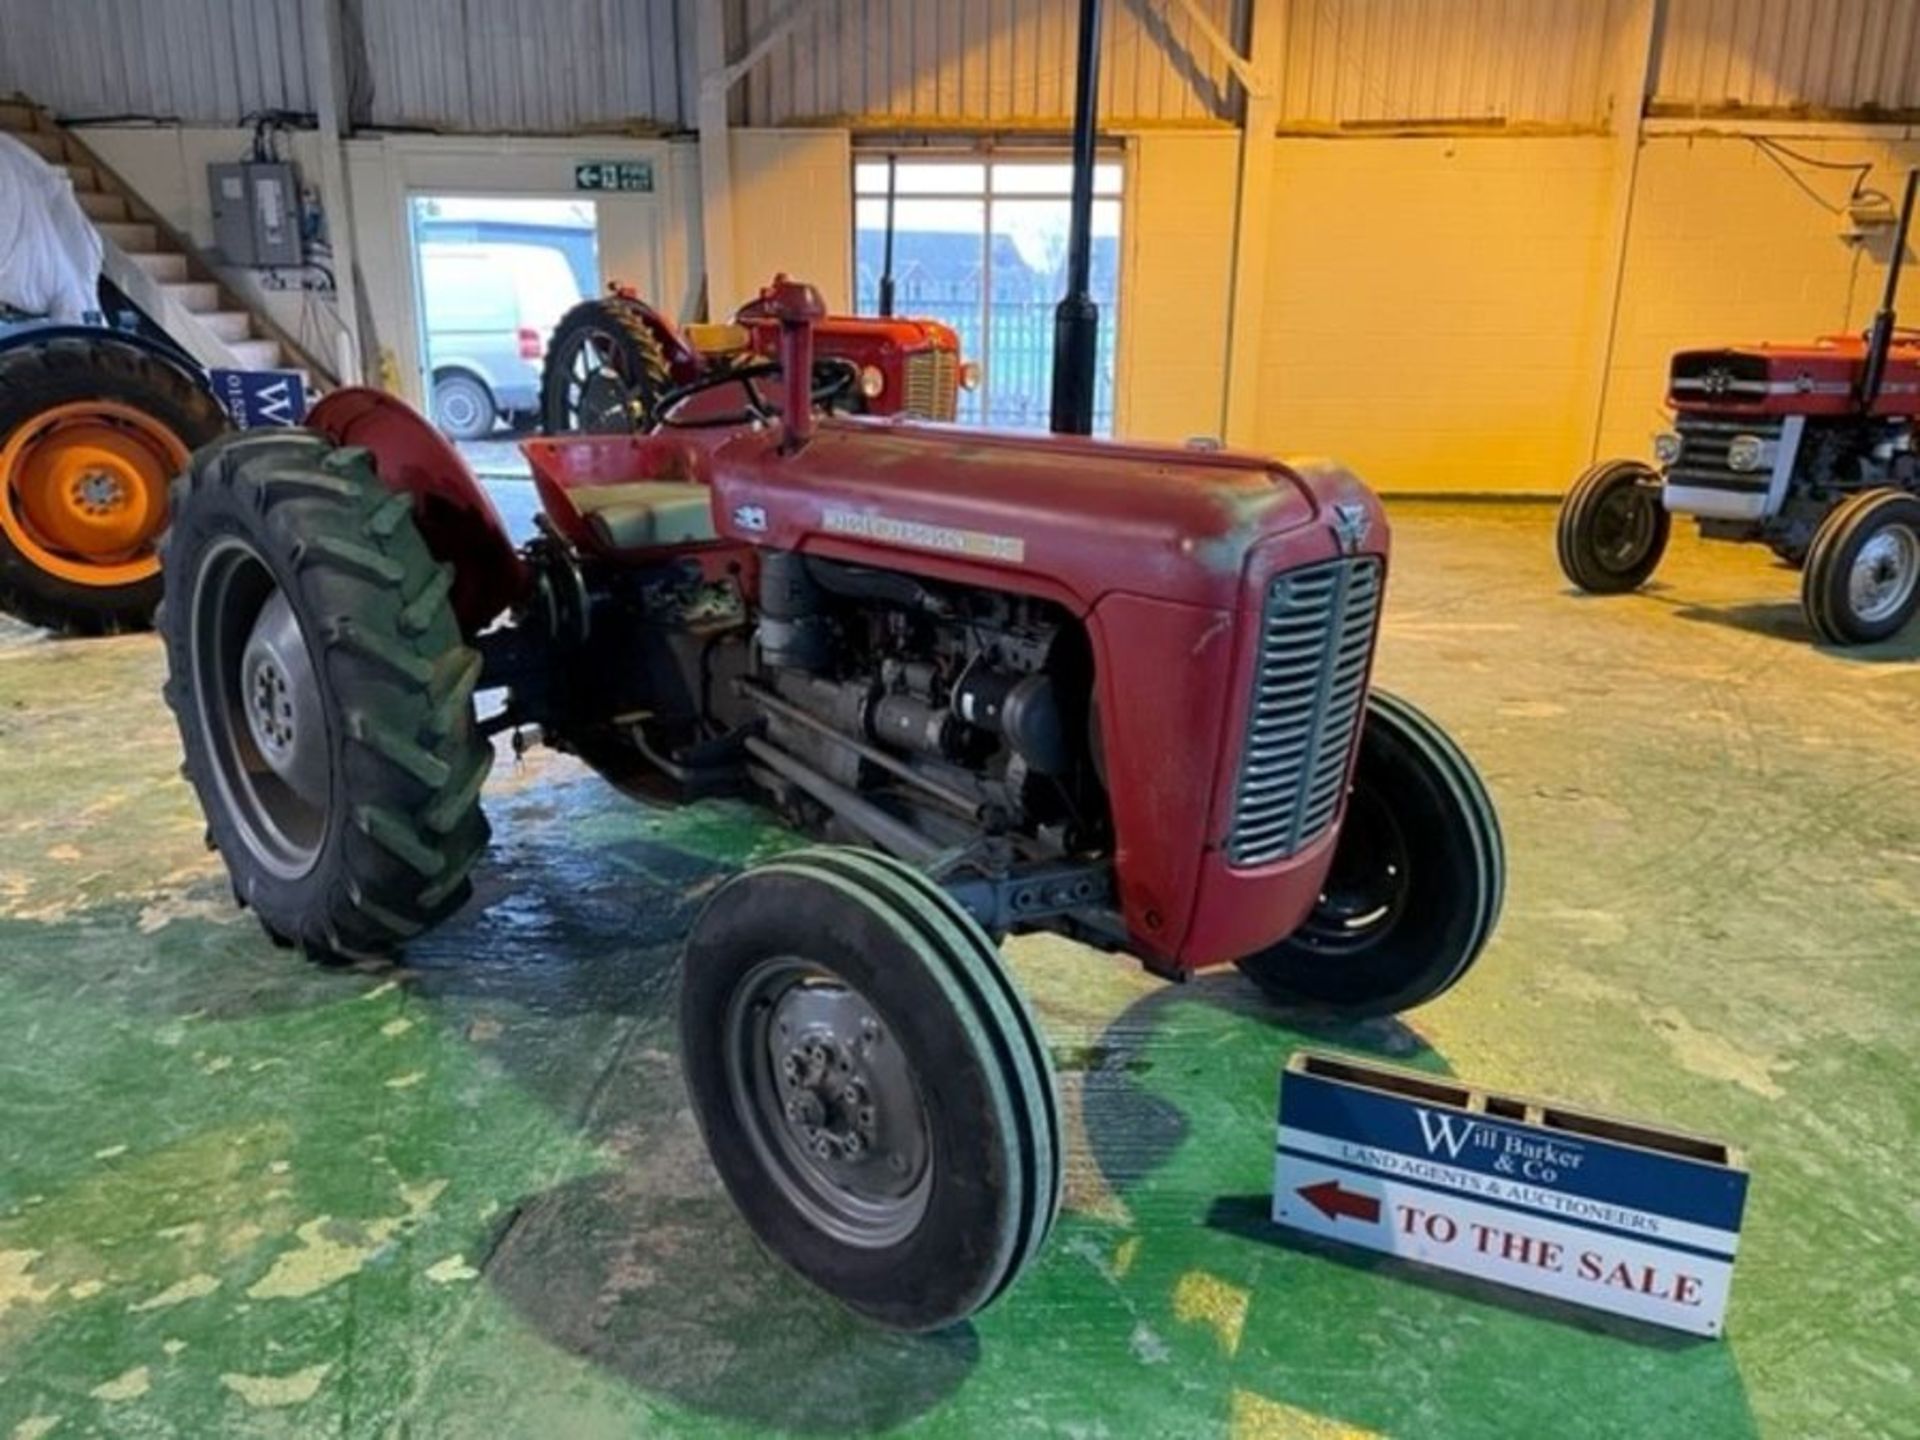 Massey Ferguson 35, 3 cylinder diesel, with pick-up hitch, SN 18247. 12.4-28 rear tyres, 6.00-16